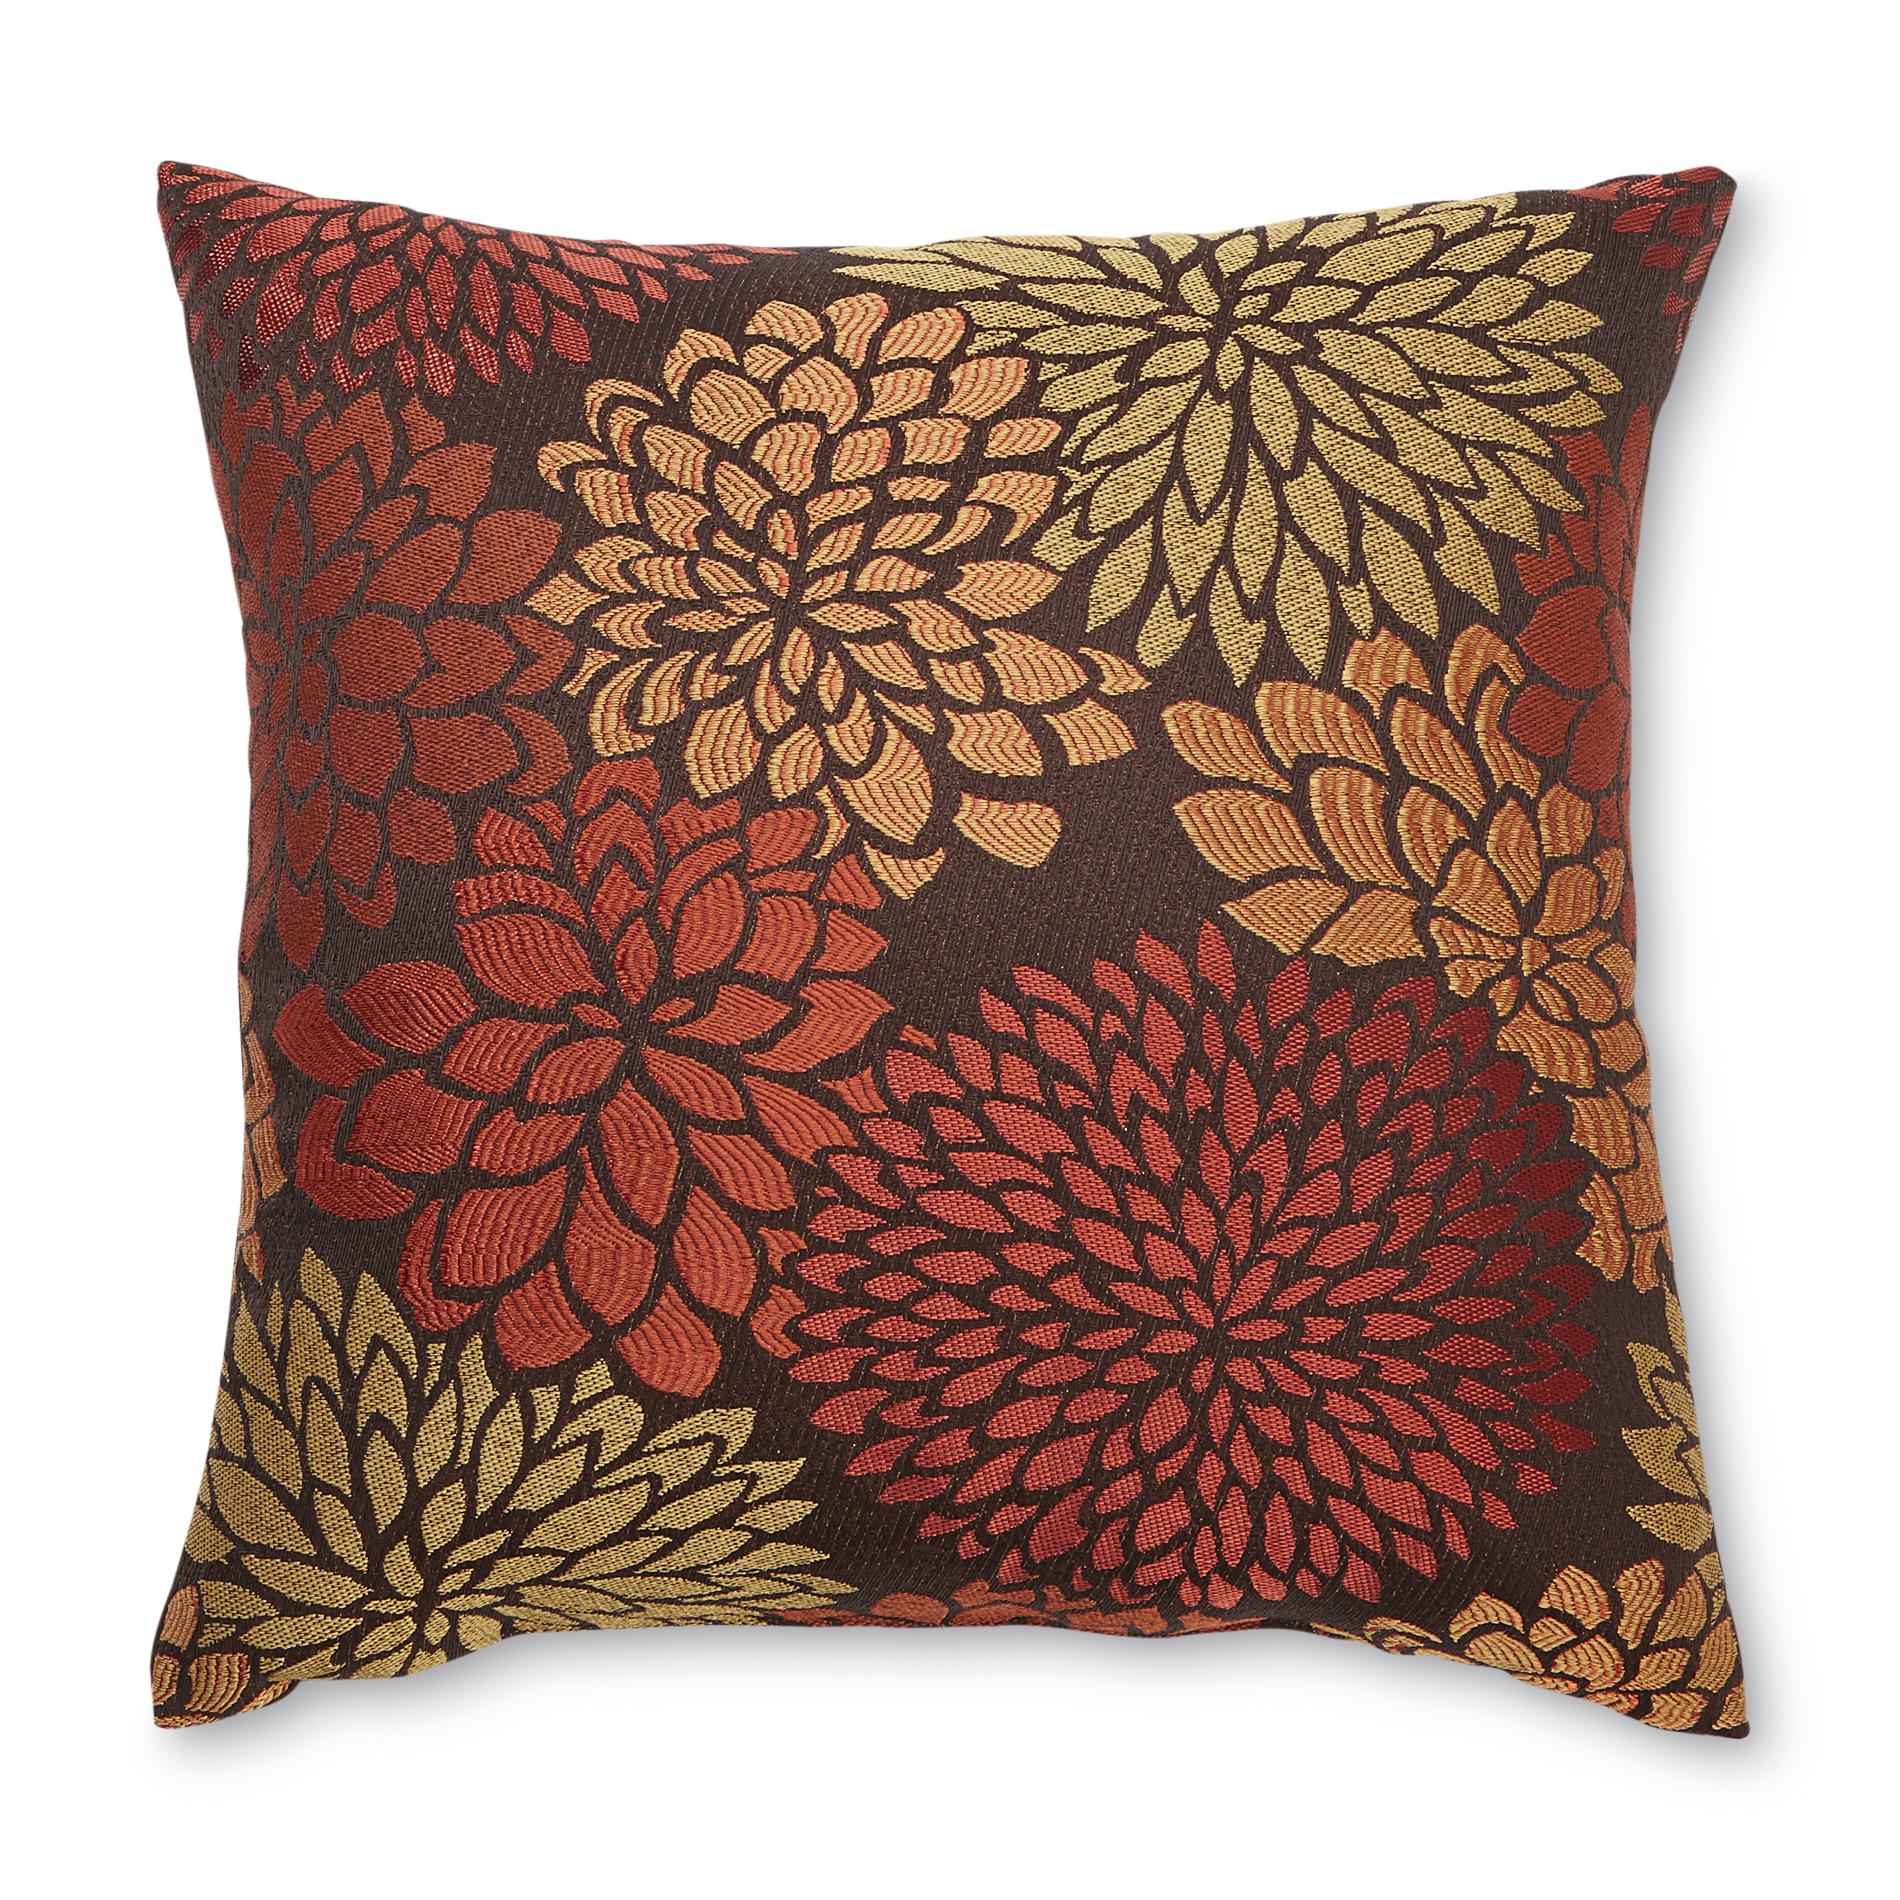 Decorative Throw Pillow - Rapture Floral - Home - Bed ...
